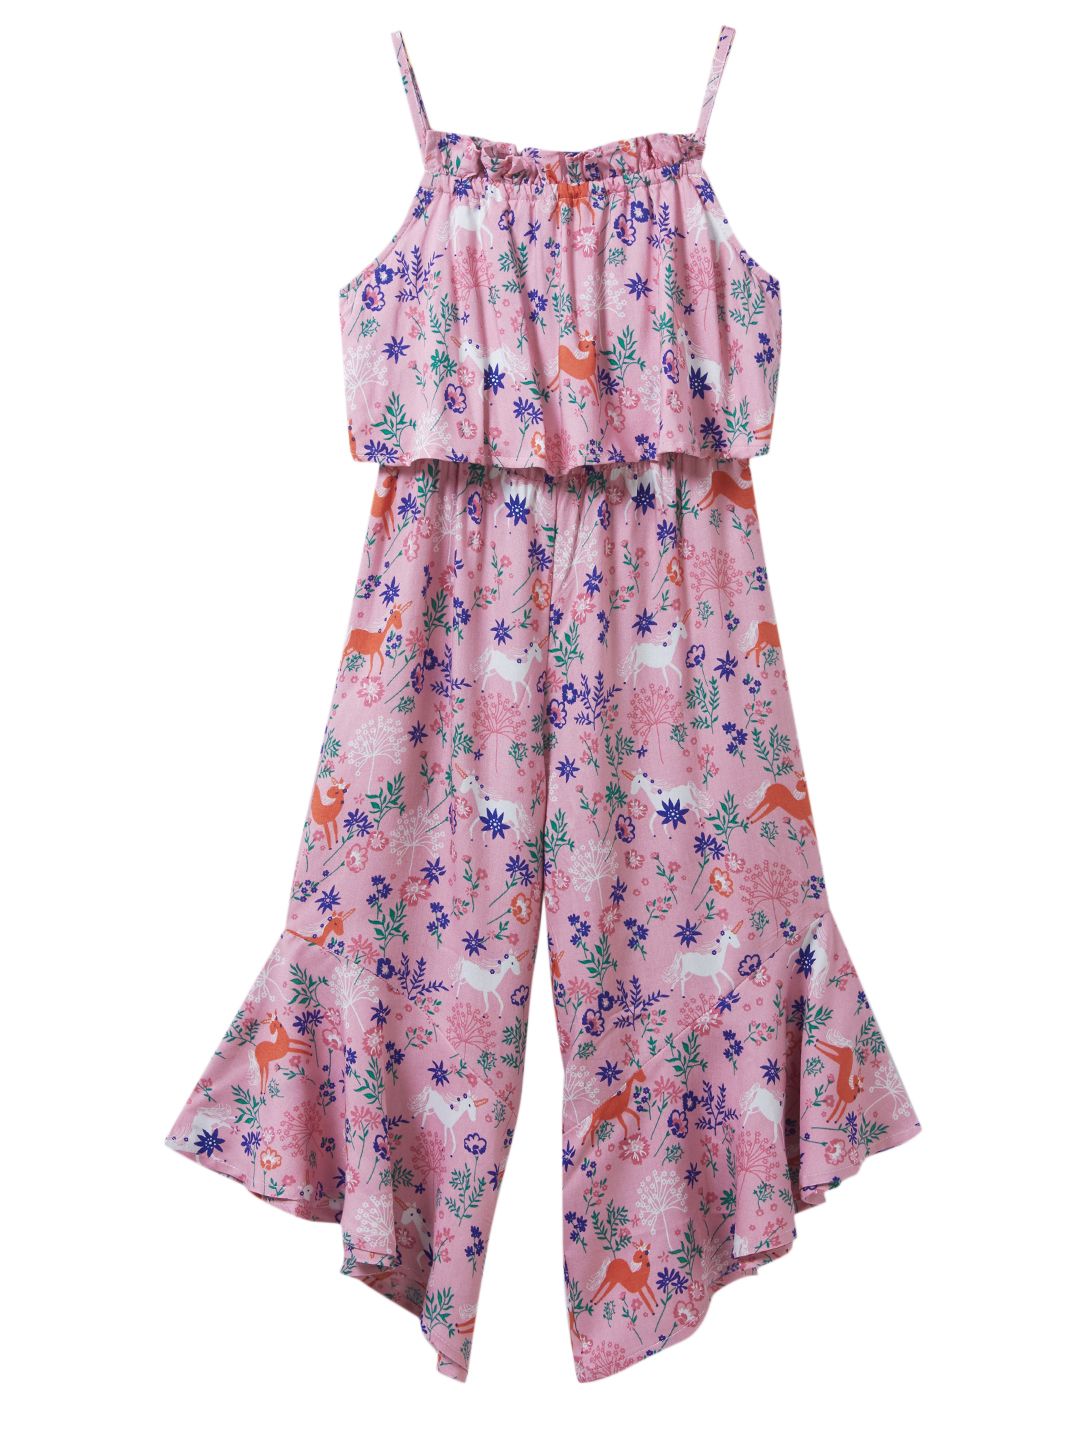 Shop Latest Jumpsuit for 4 - 12 Year Girls Online @ Best Prices